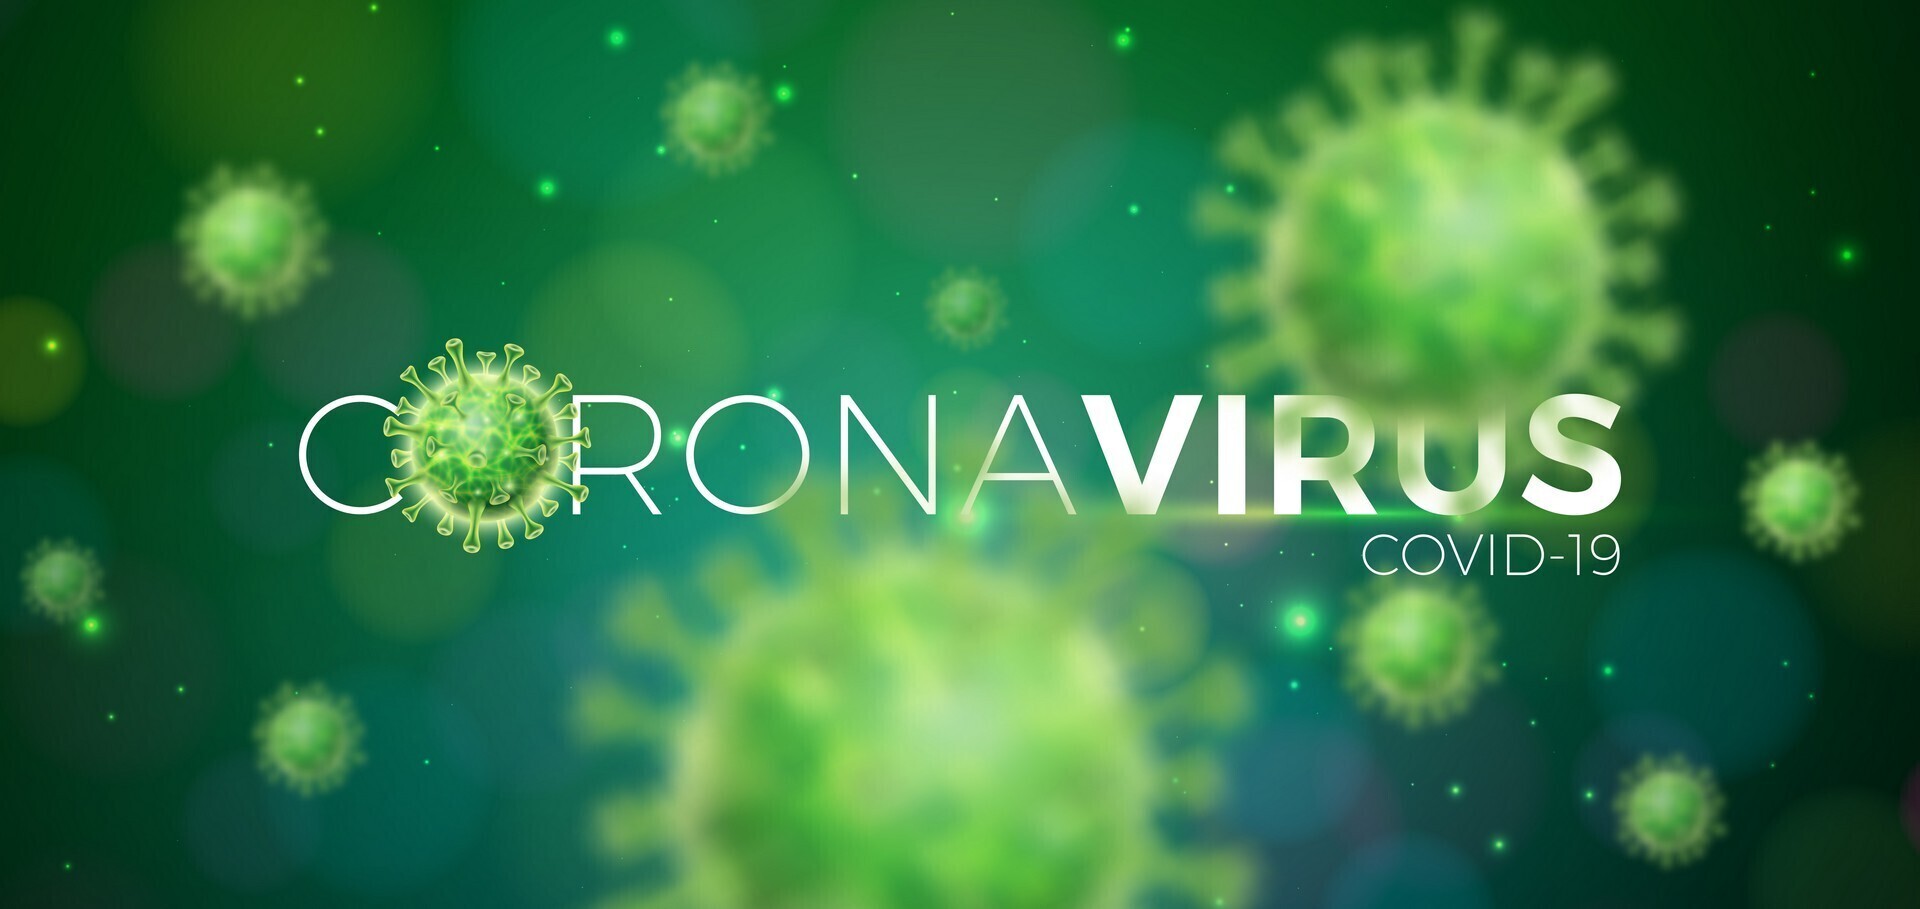 Covid-19. Coronavirus Outbreak Design with Virus Cell in Microscopic View on Green Background. Vector Illustration Template on Dangerous SARS Epidemic Theme for Promotional Banner or Flyer.